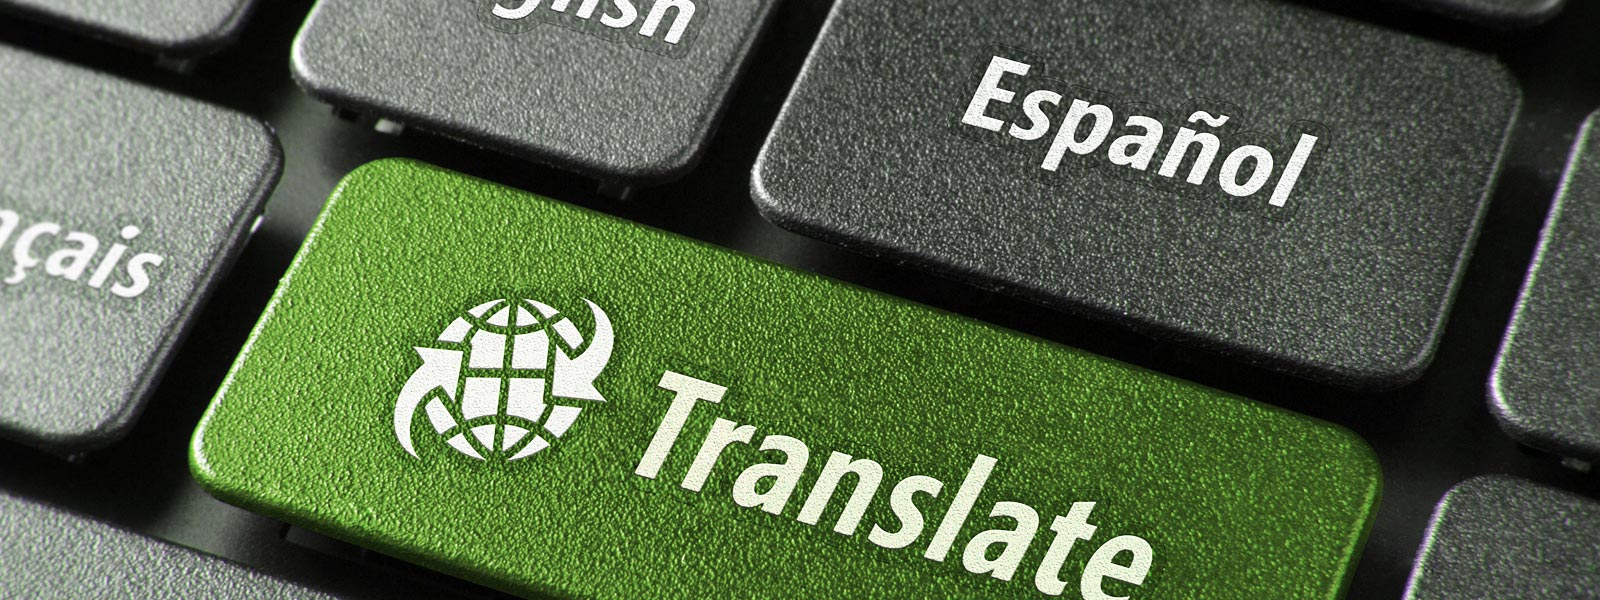 High Quality and Accurate Translation and Interpretation services in many languages - We Talk Your Language